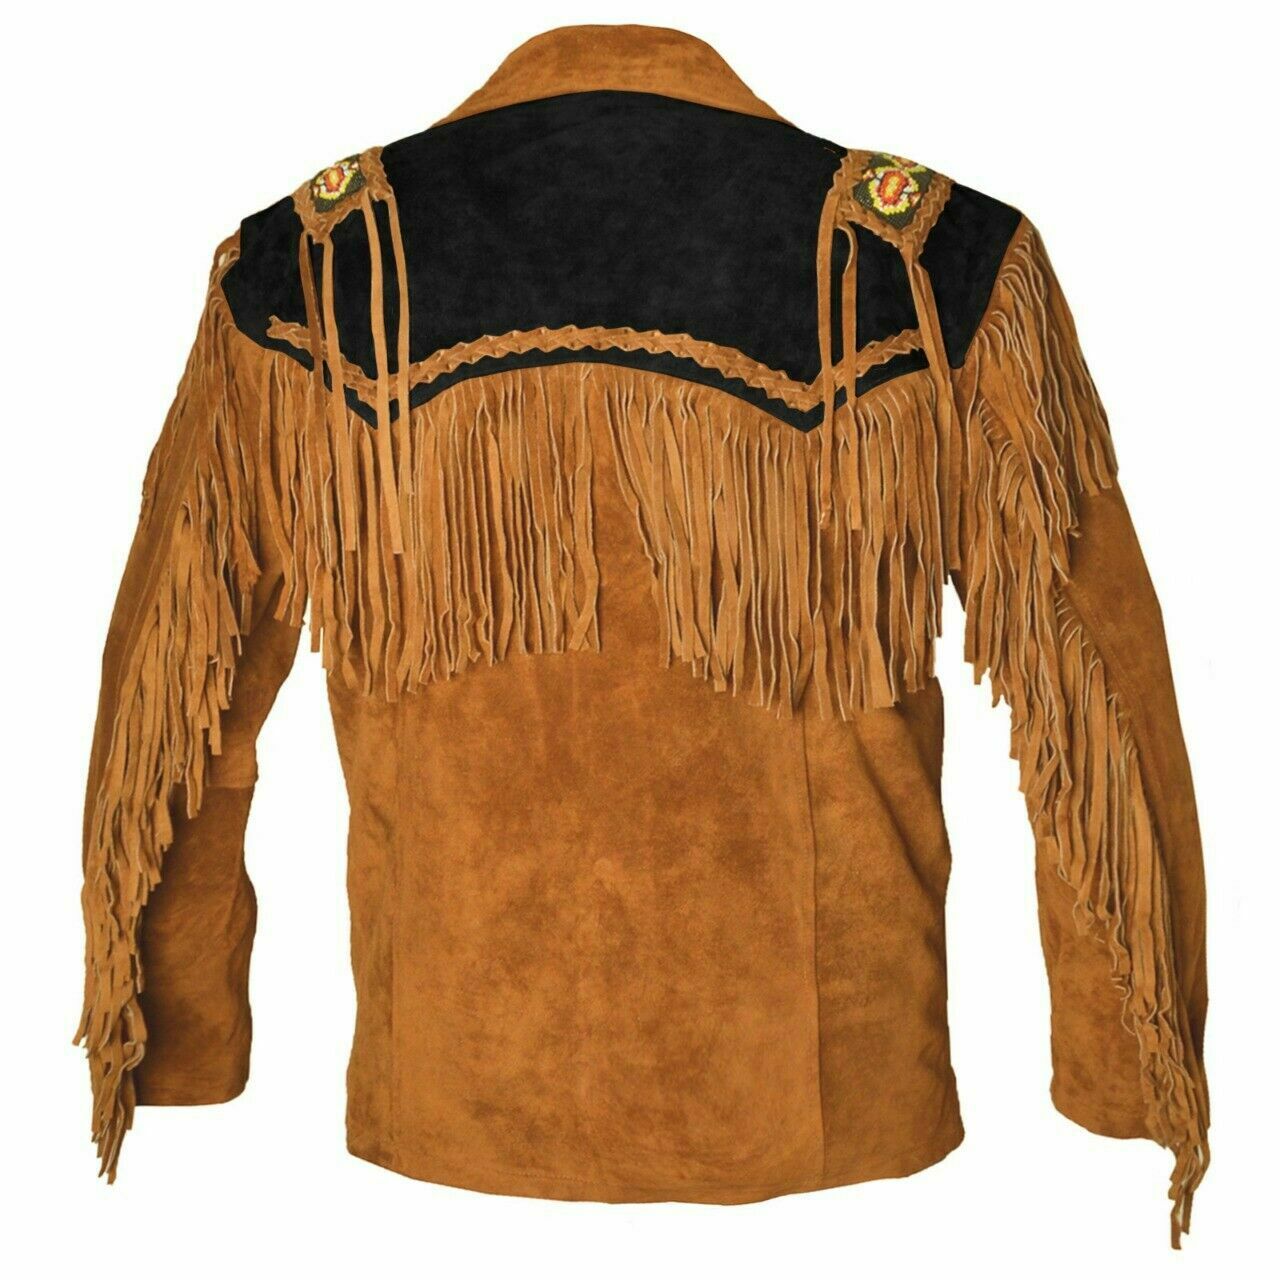 New Men's Suede Western Style Cowboy Leather Jacket With Fringe